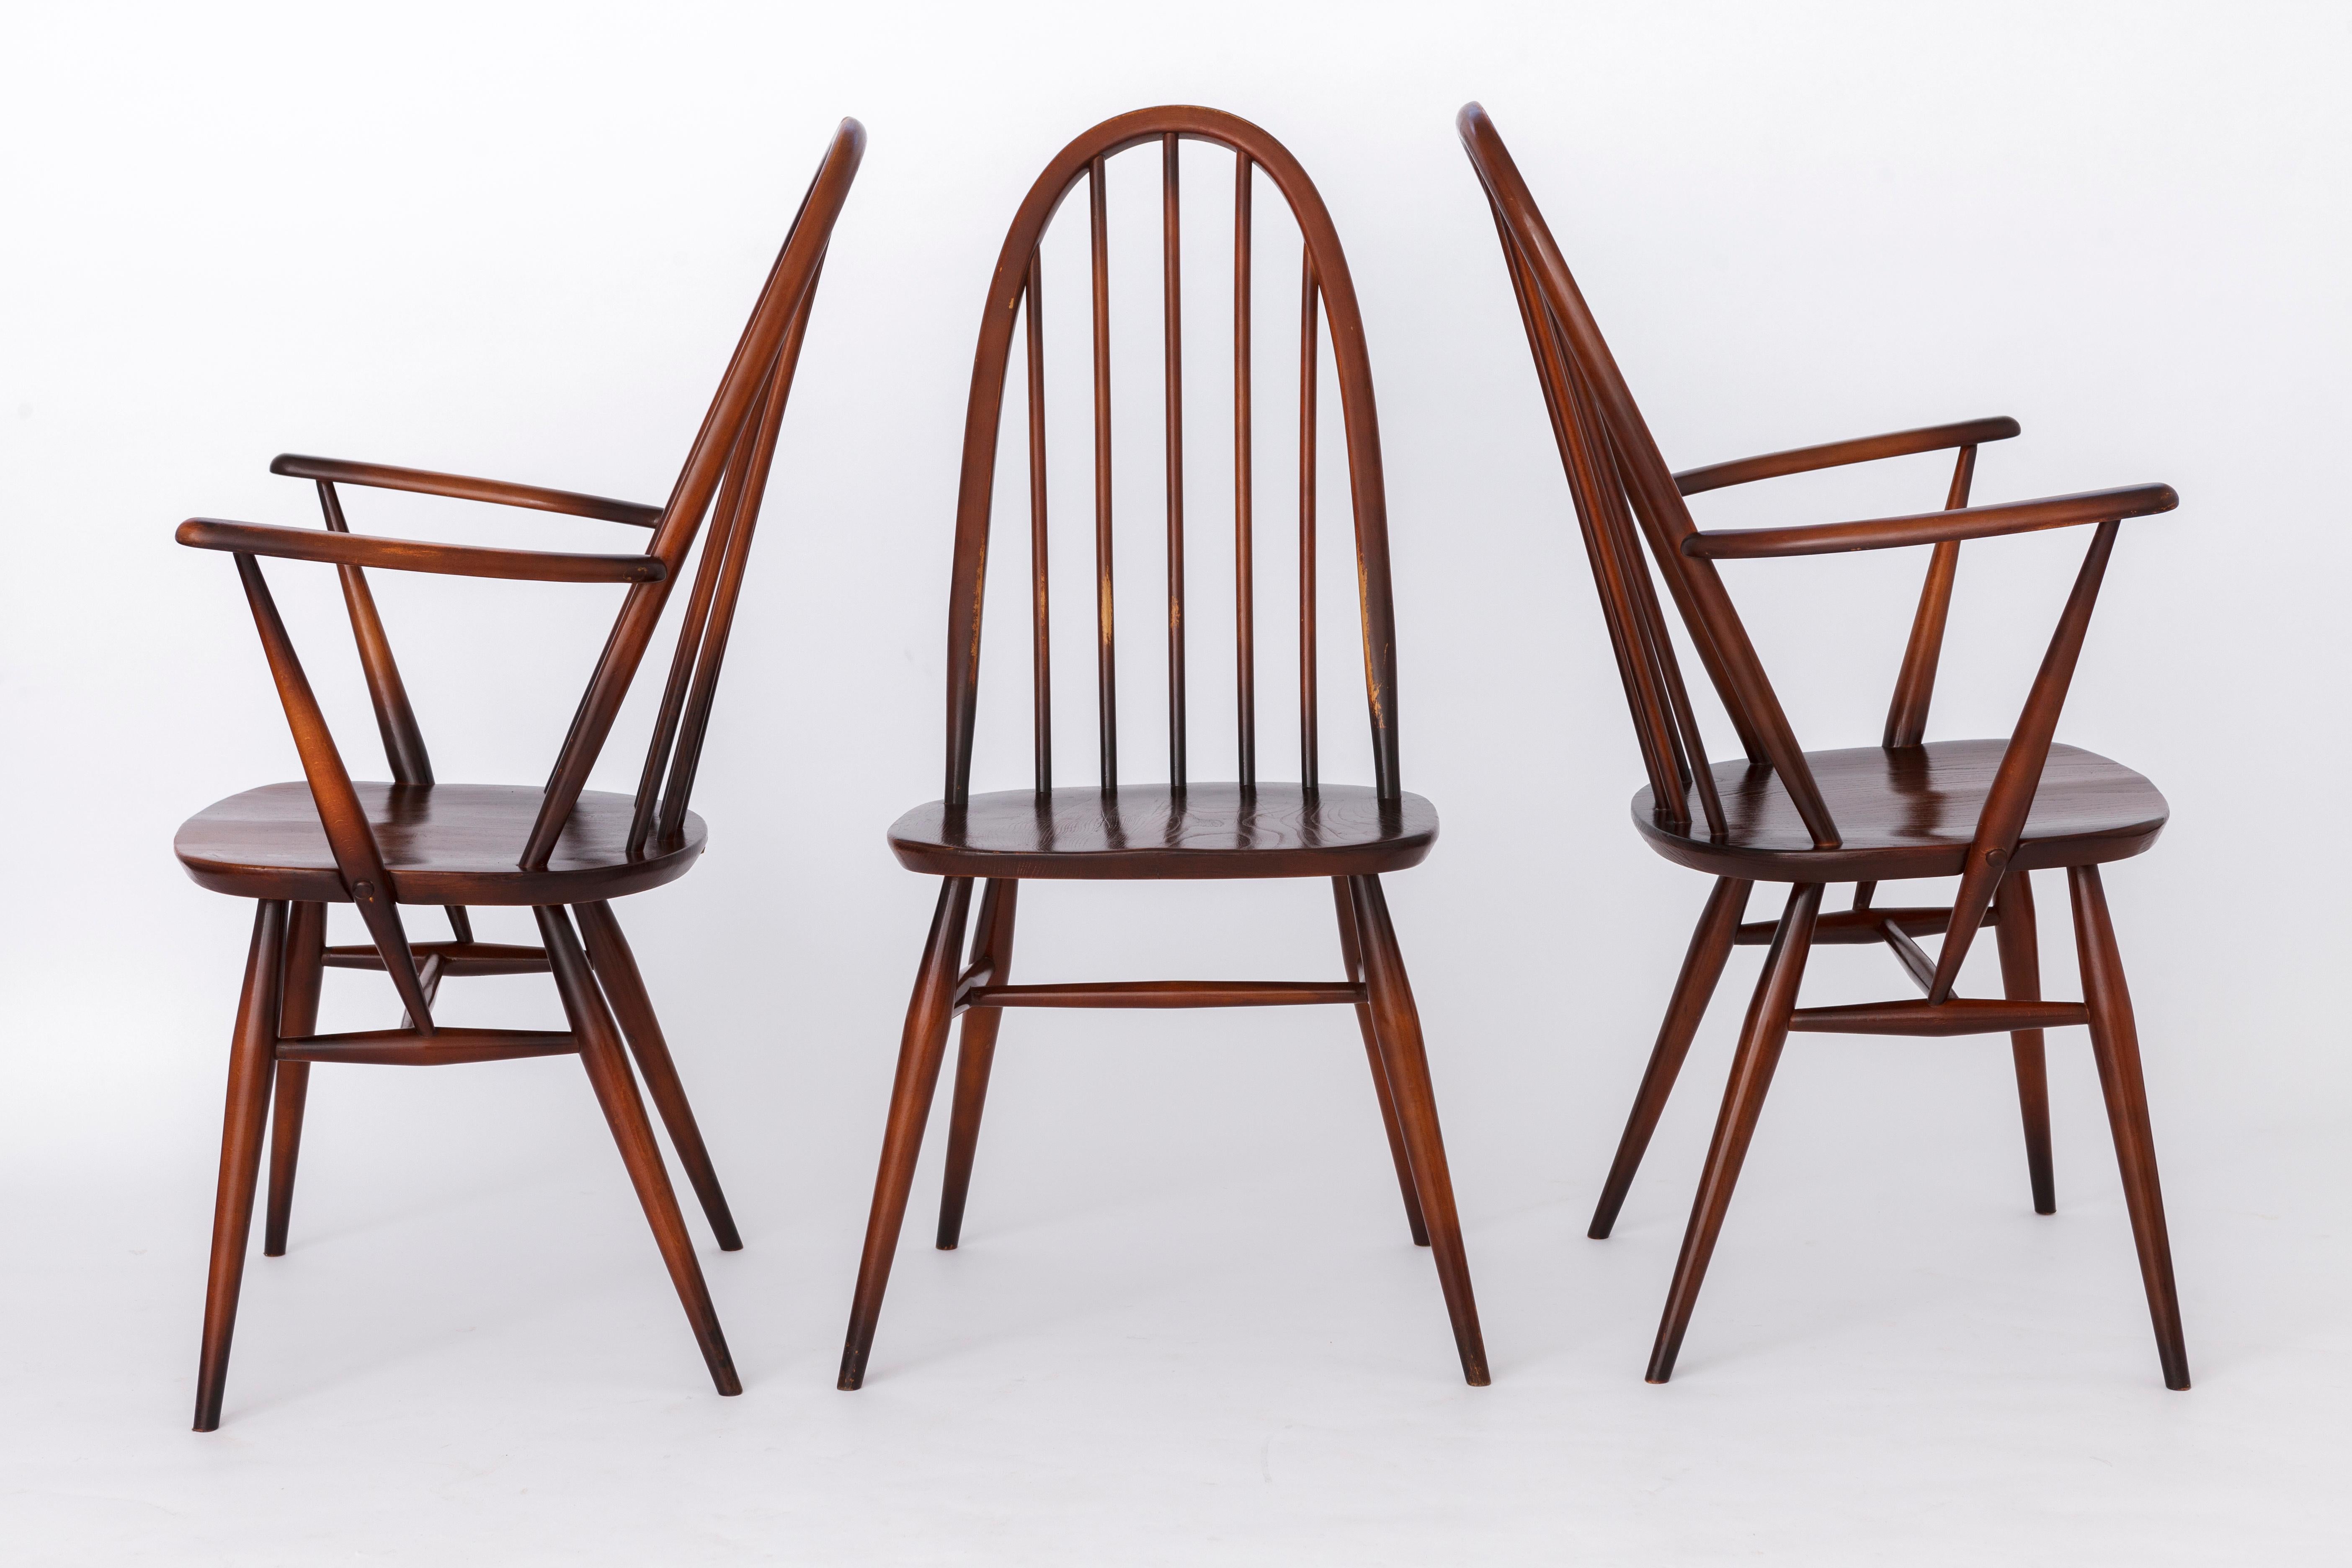 Polished Set of 6 Ercol 365 Quaker Windsor Chairs, 1960s Vintage, England